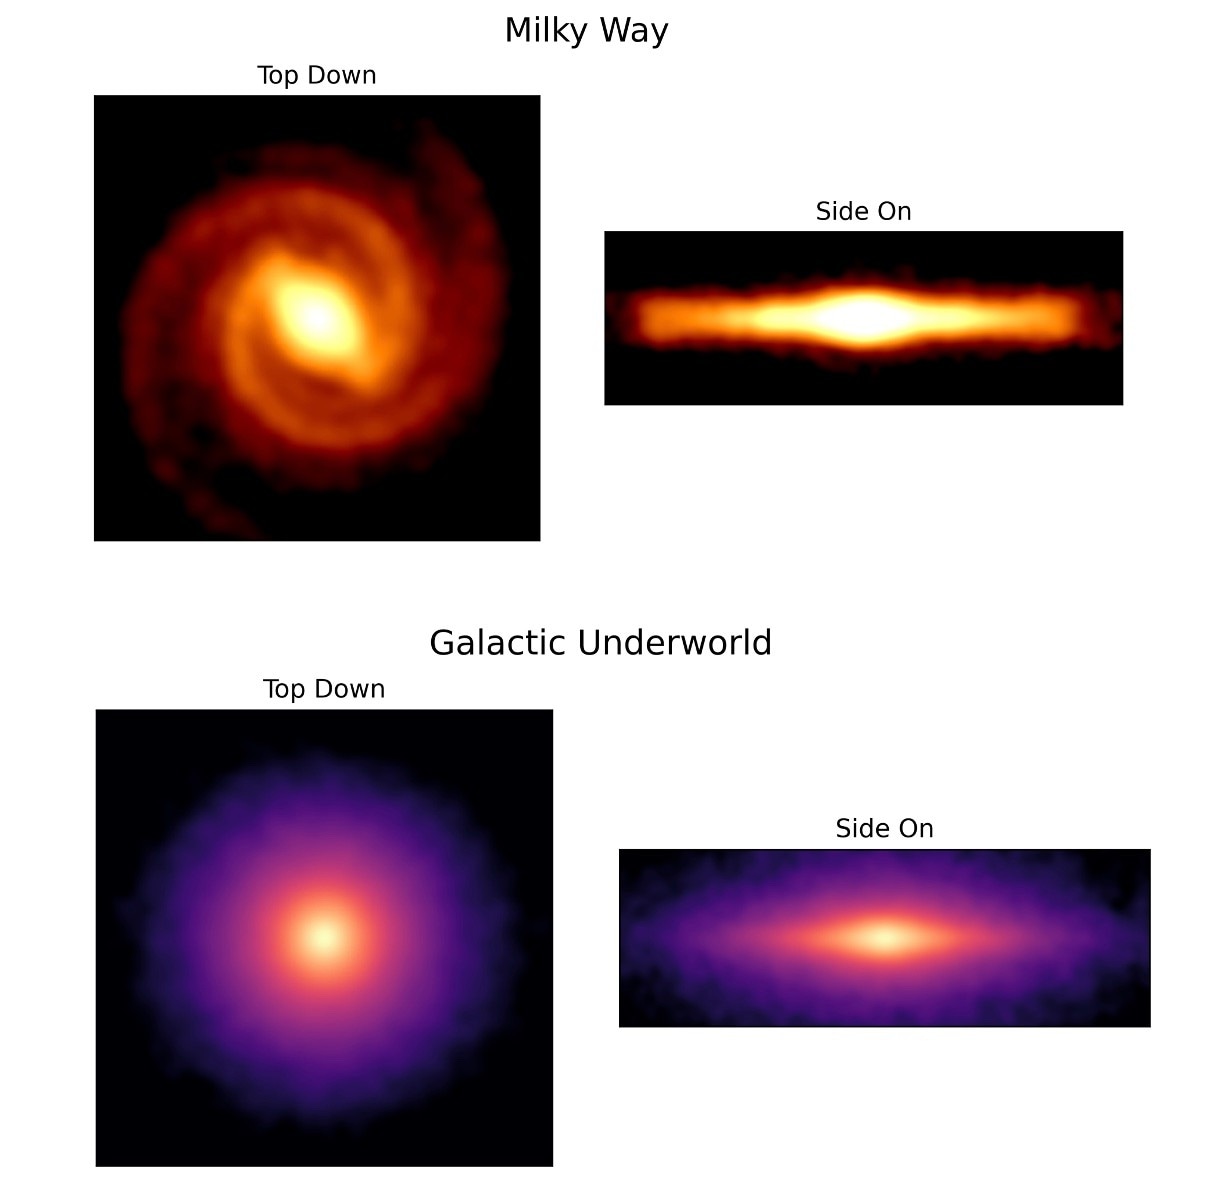 A colour rendition of the visible Milky Way galaxy (top) compared with the range of the galactic underworld (bottom)